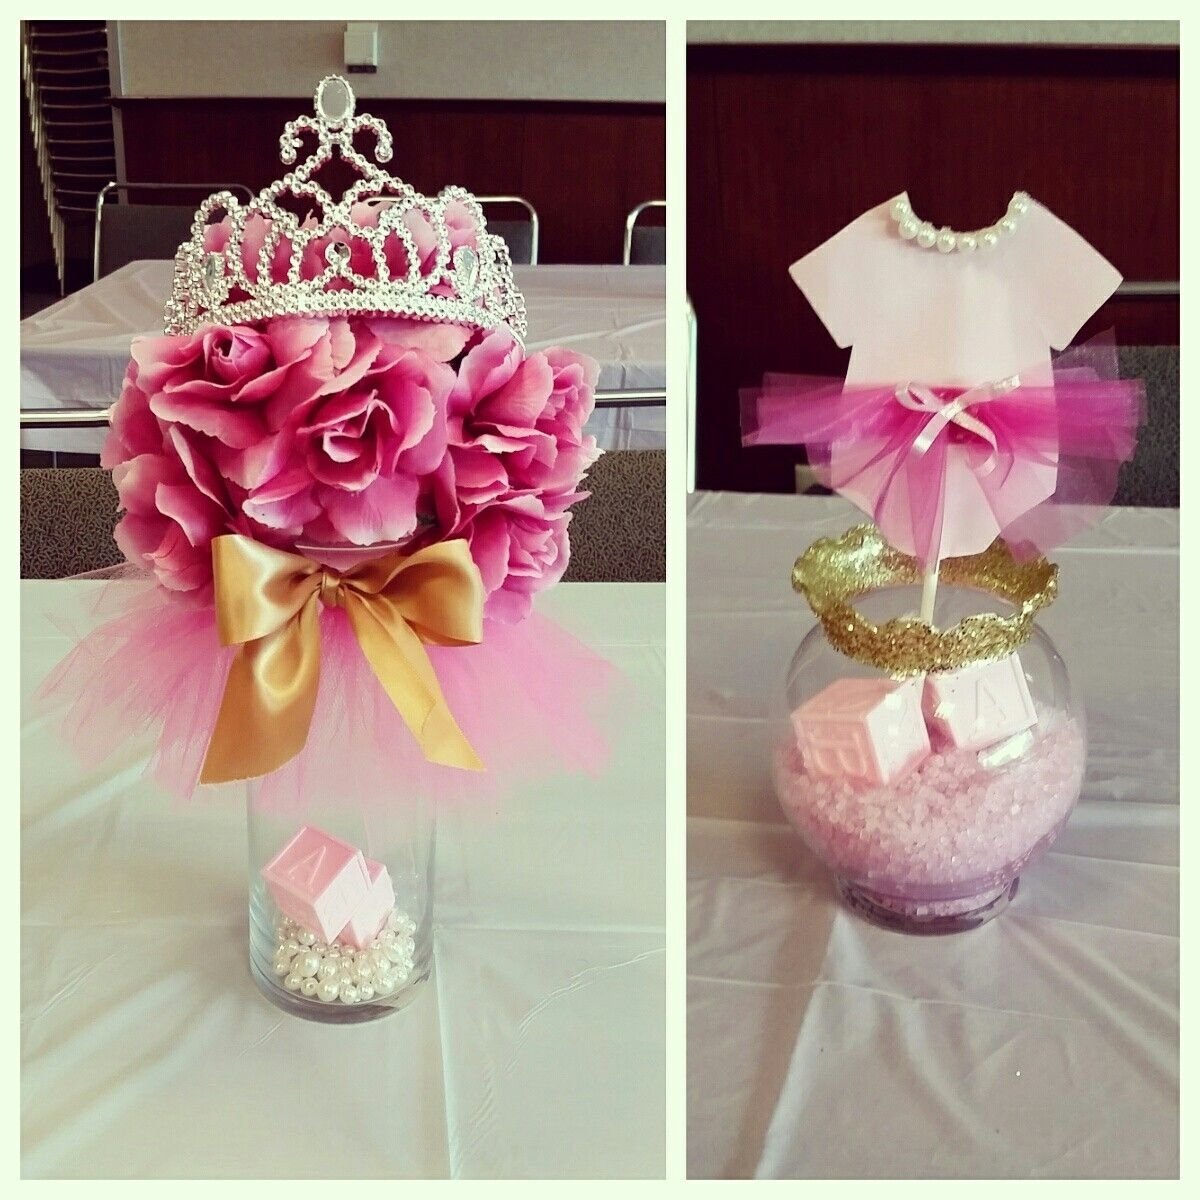 10 Nice Baby Shower Decorating Ideas For A Girl tutus tiaras baby shower centerpieces pinkandgold my diy 1 2022